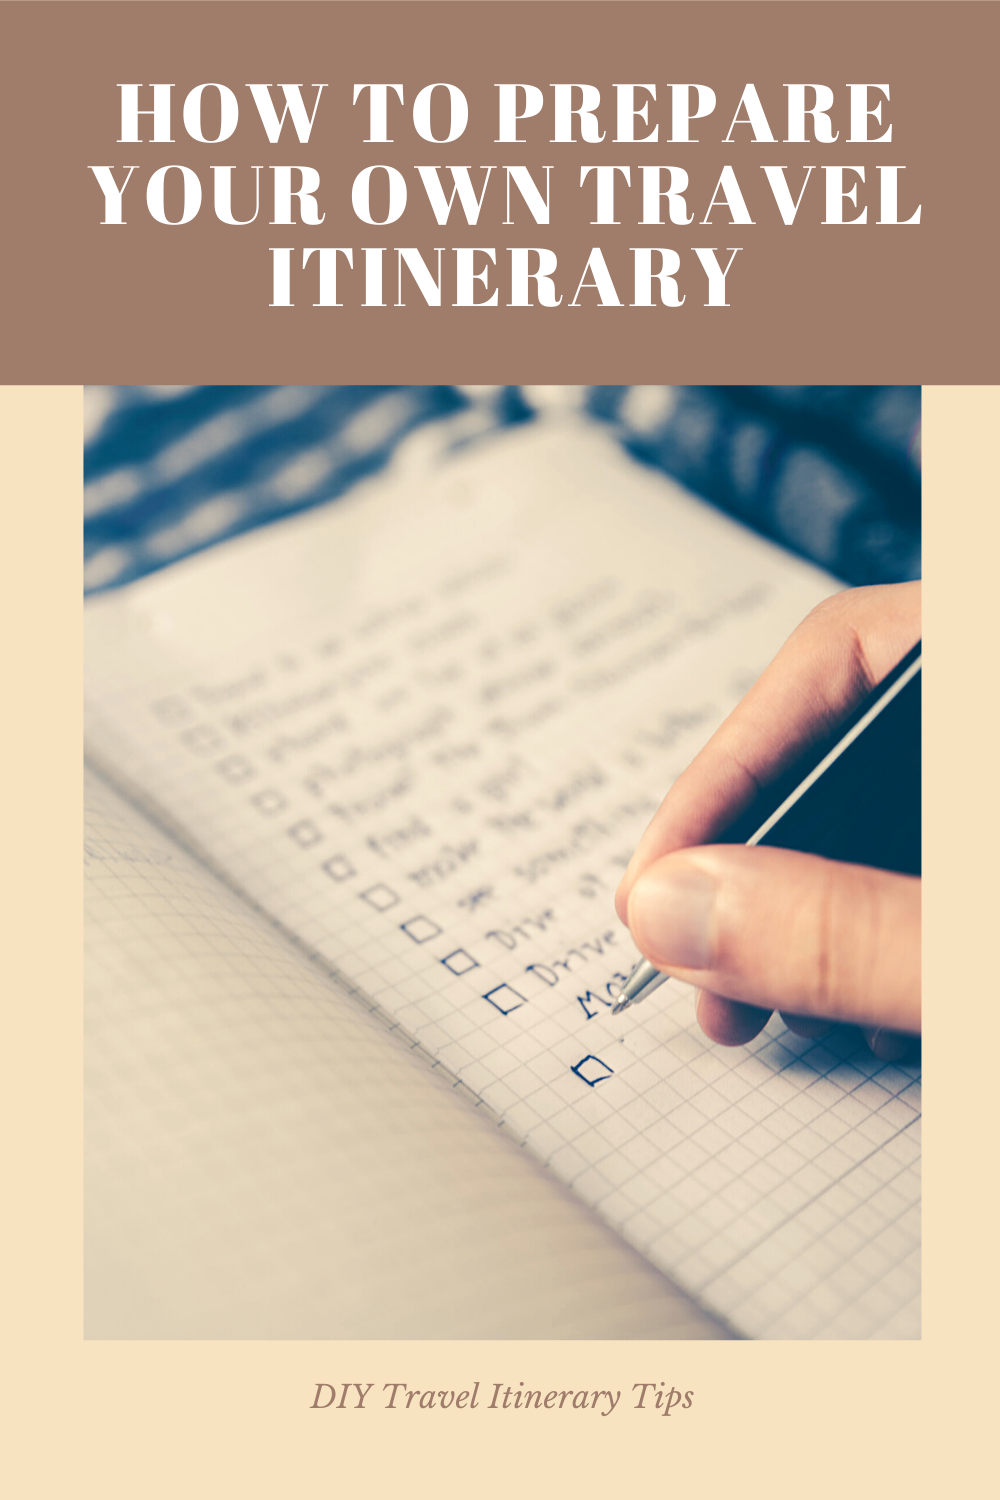 DIY Travel Itinerary Tips - How to Prepare Your Own Travel Itinerary1.png